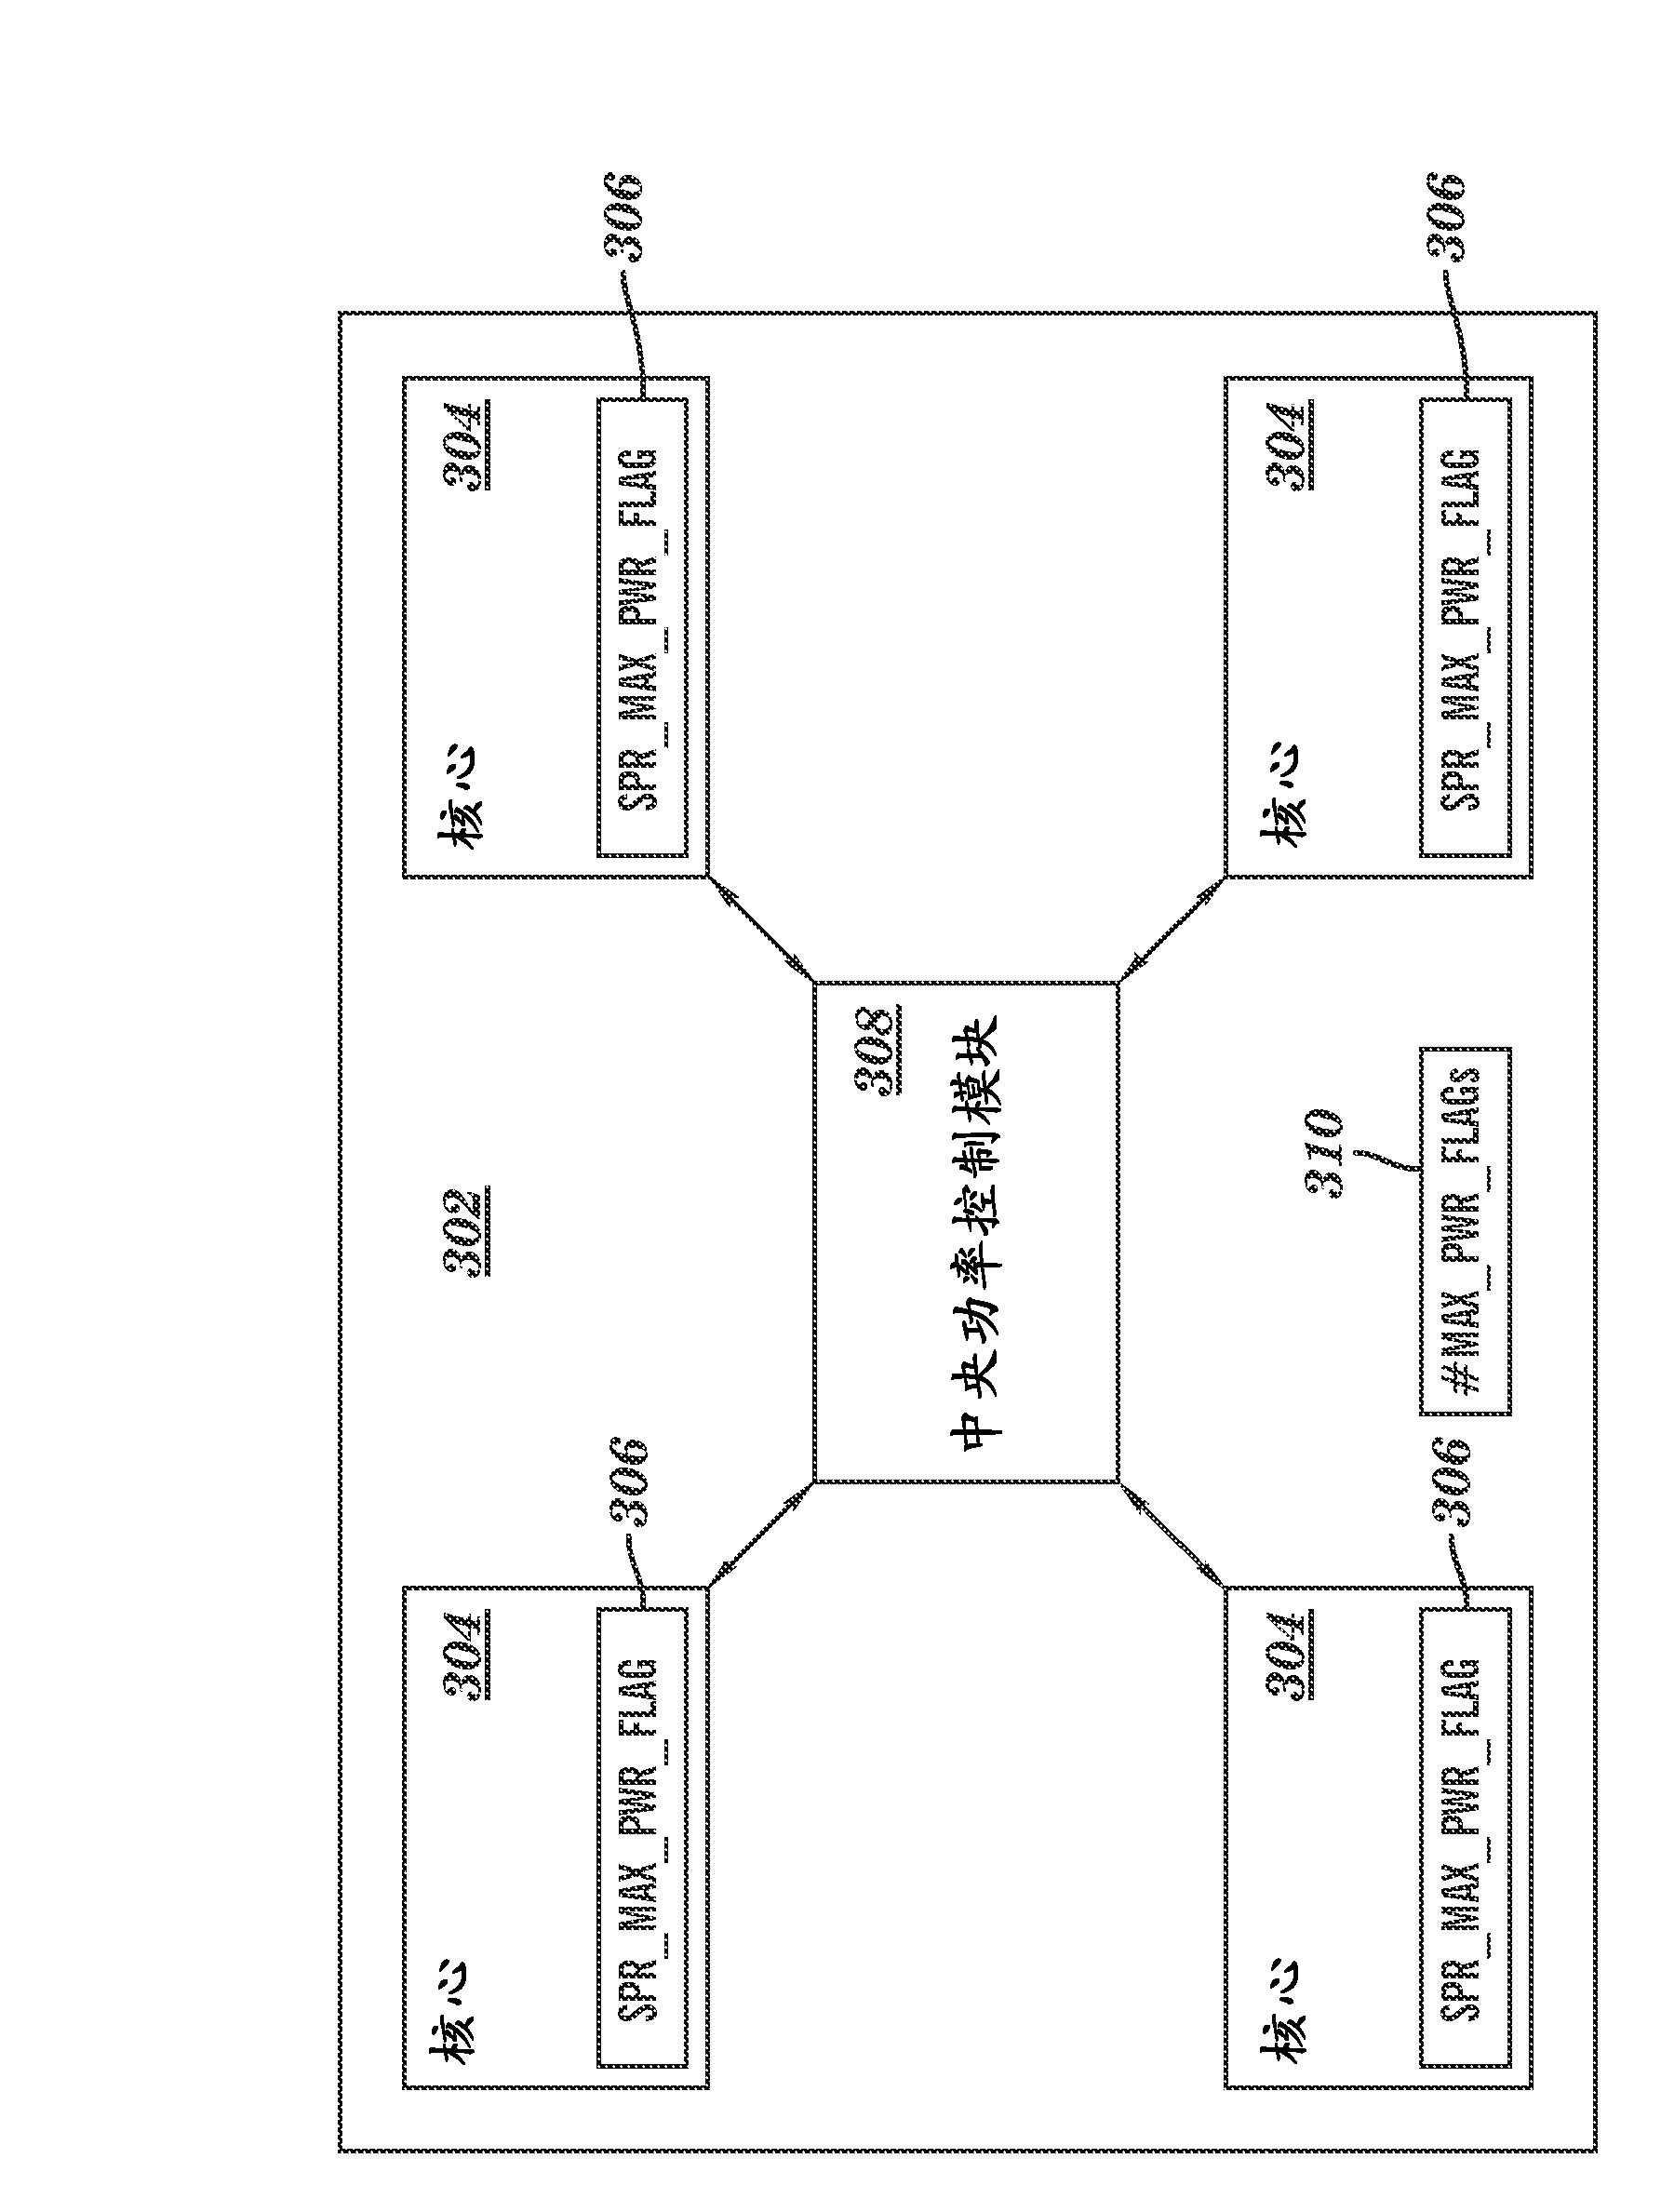 Power management in a multi-processor computer system